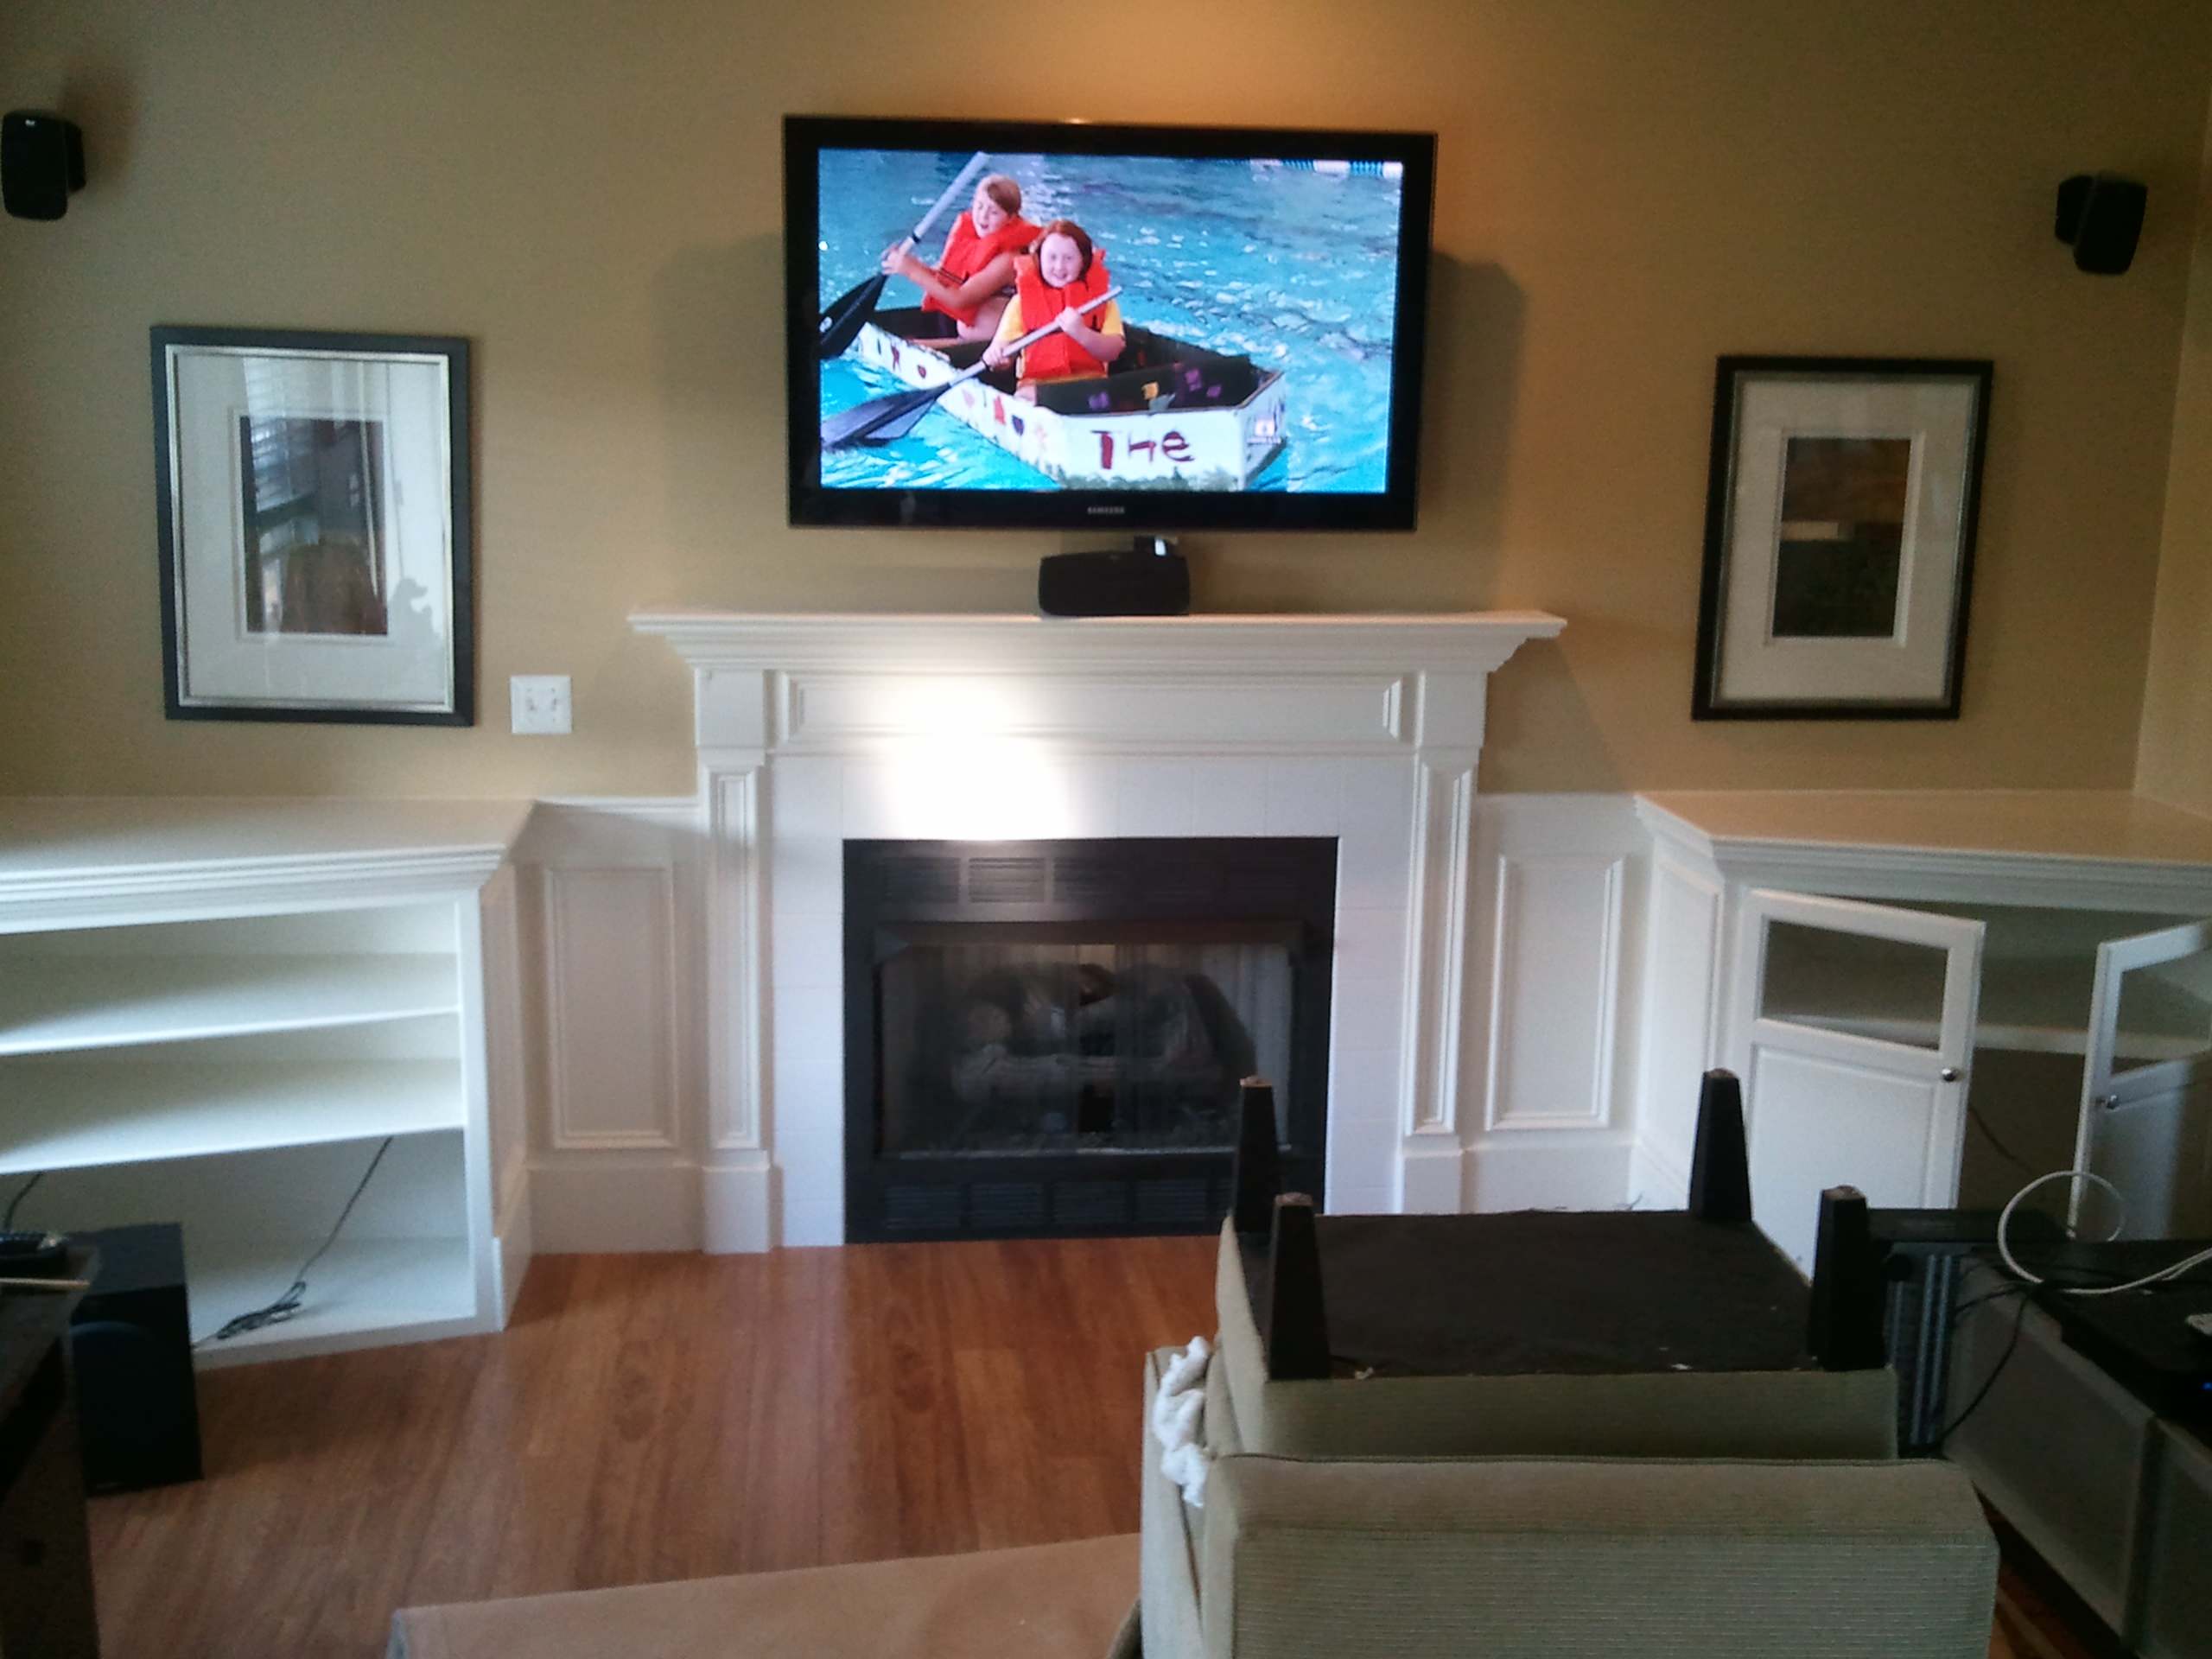 Built In Shelving and Cabinets To Hide Electronics and Surround Fireplace